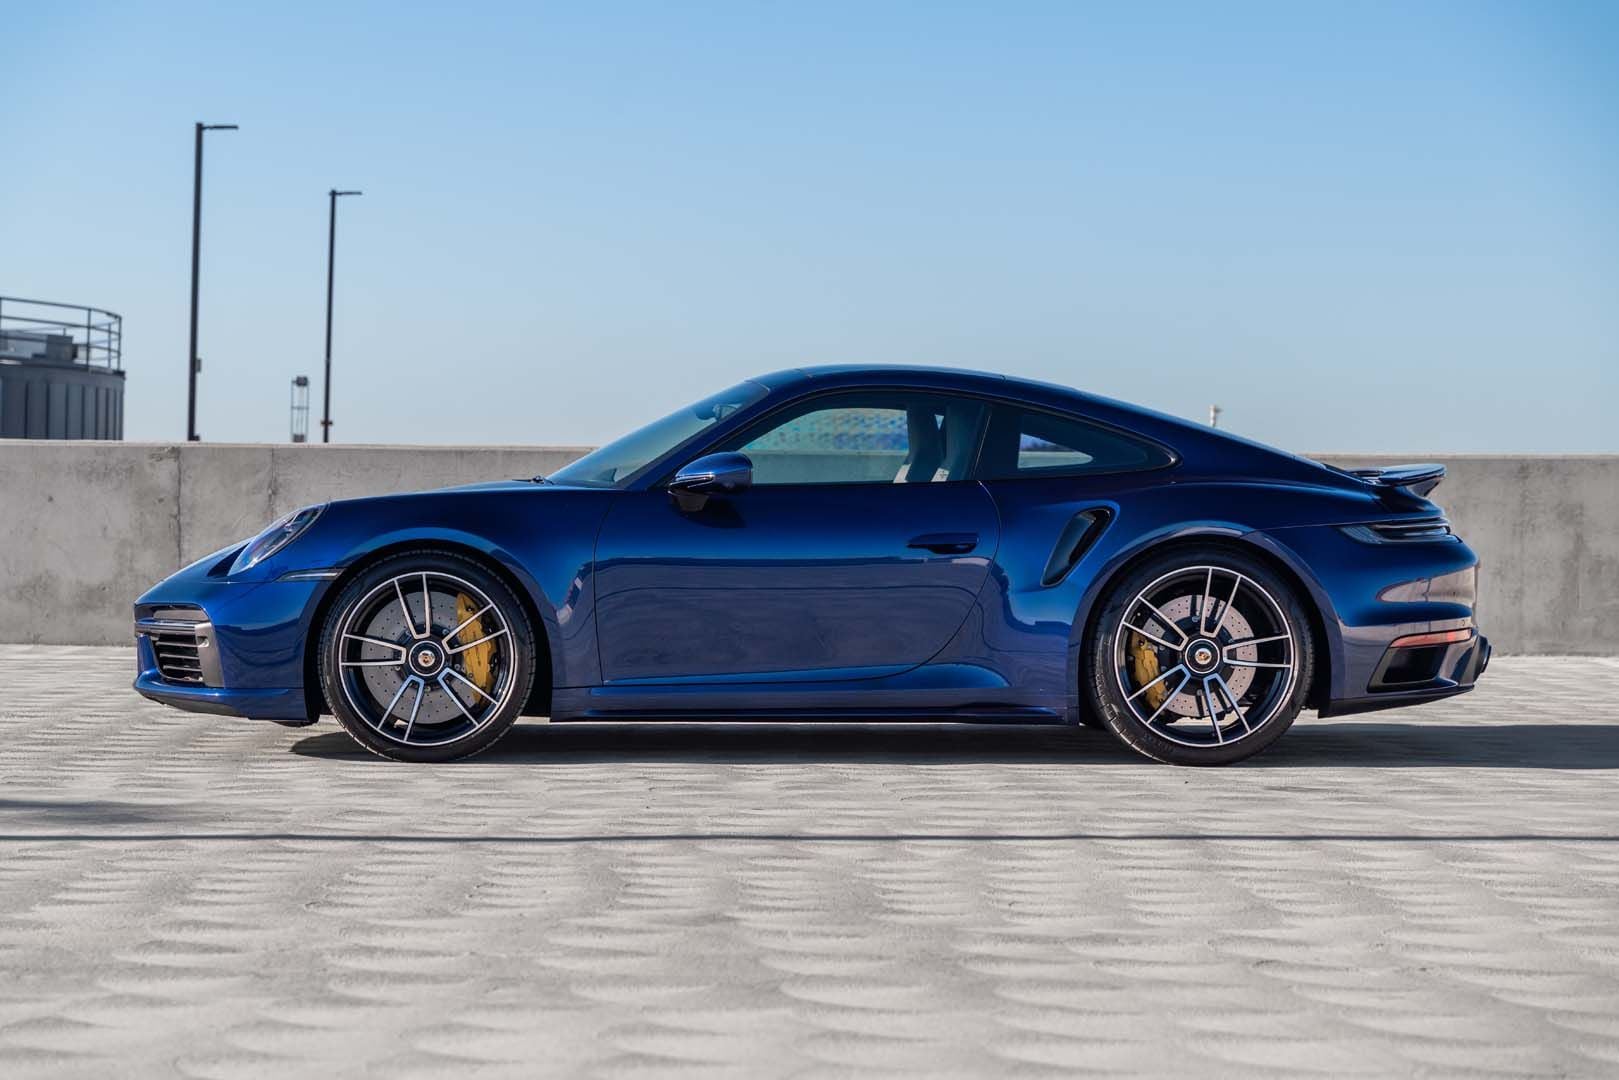 2021 Porsche 911 - 2021 Gentian Blue Turbo S for Sale - Used - VIN WP0AD2A95MS258204 - 4,932 Miles - 6 cyl - AWD - Automatic - Coupe - Blue - San Diego, CA 92130, United States